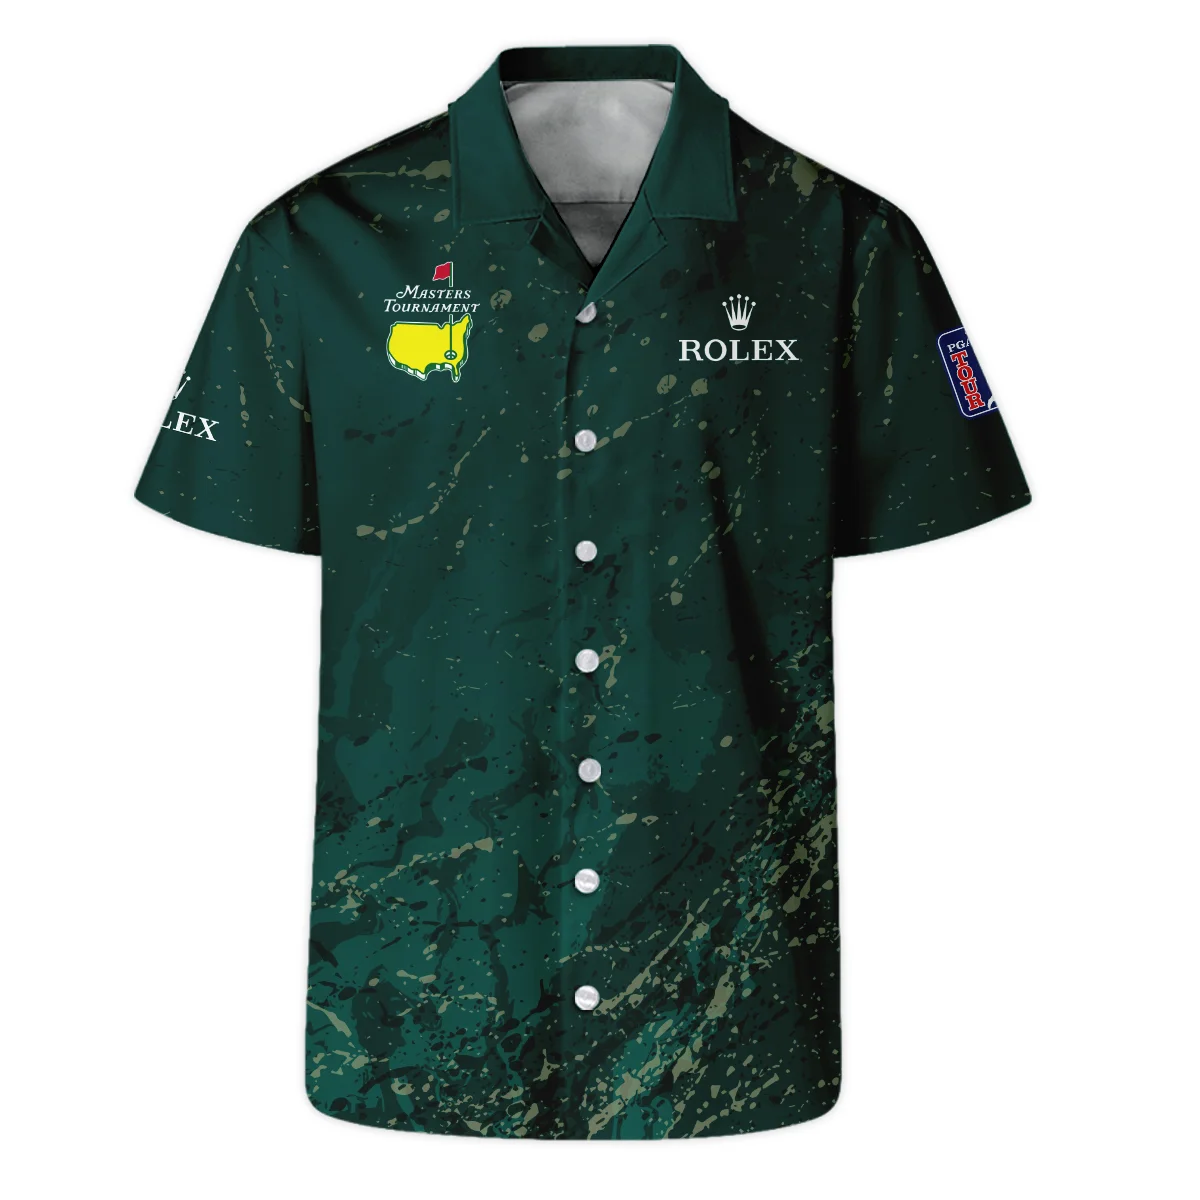 Old Cracked Texture With Gold Splash Paint Masters Tournament Rolex Zipper Polo Shirt Style Classic Zipper Polo Shirt For Men